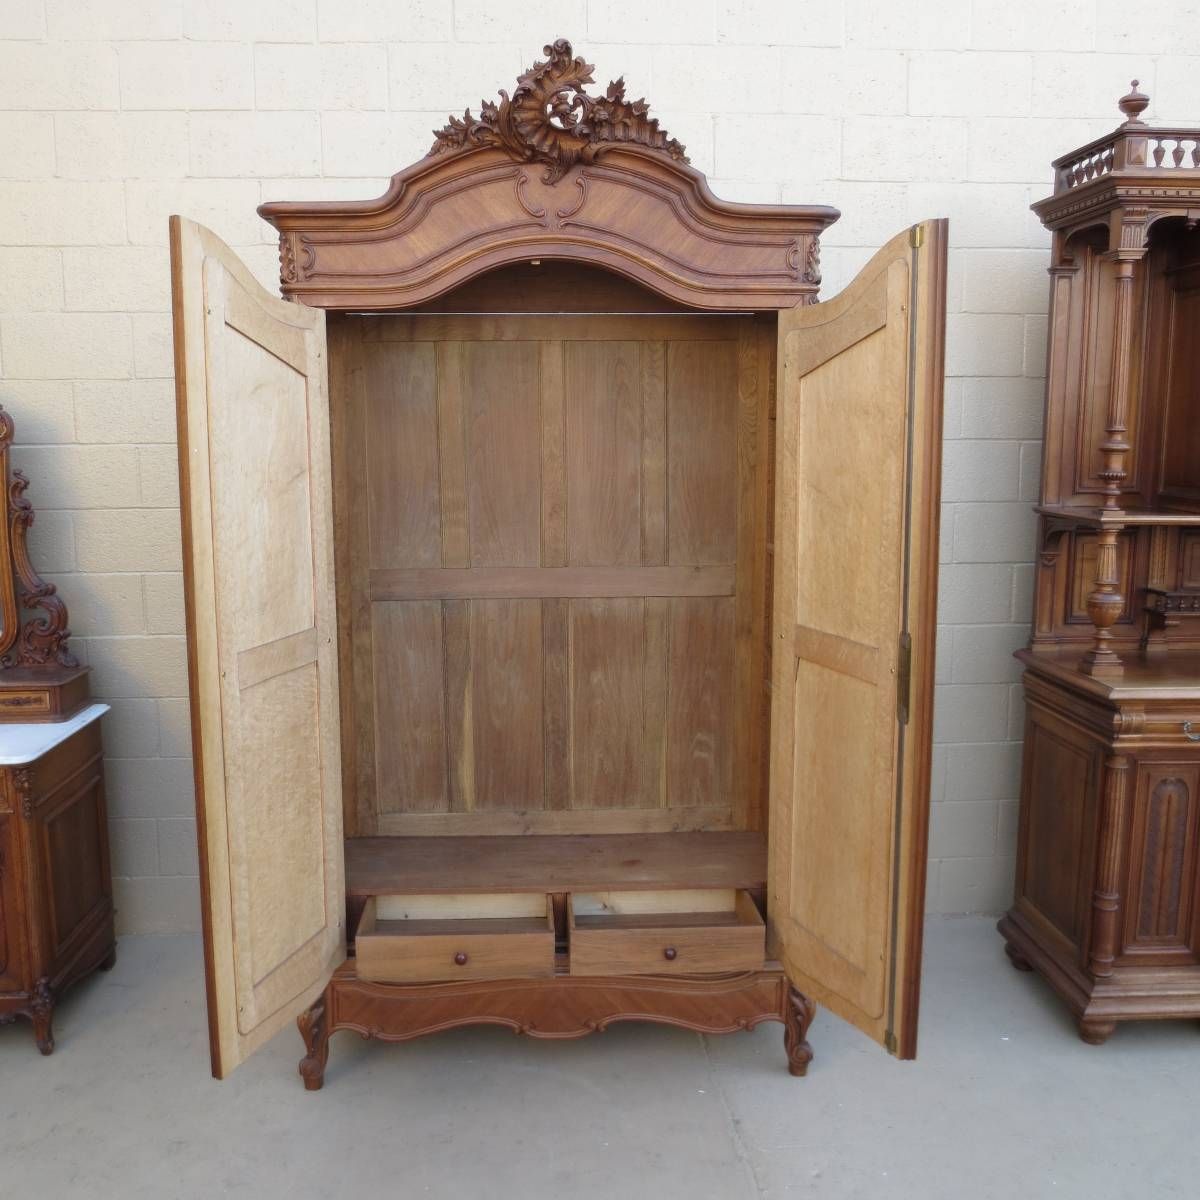 French Antique Armoire Antique Wardrobe Antique Furniture Pertaining To French Antique Wardrobes (View 2 of 15)